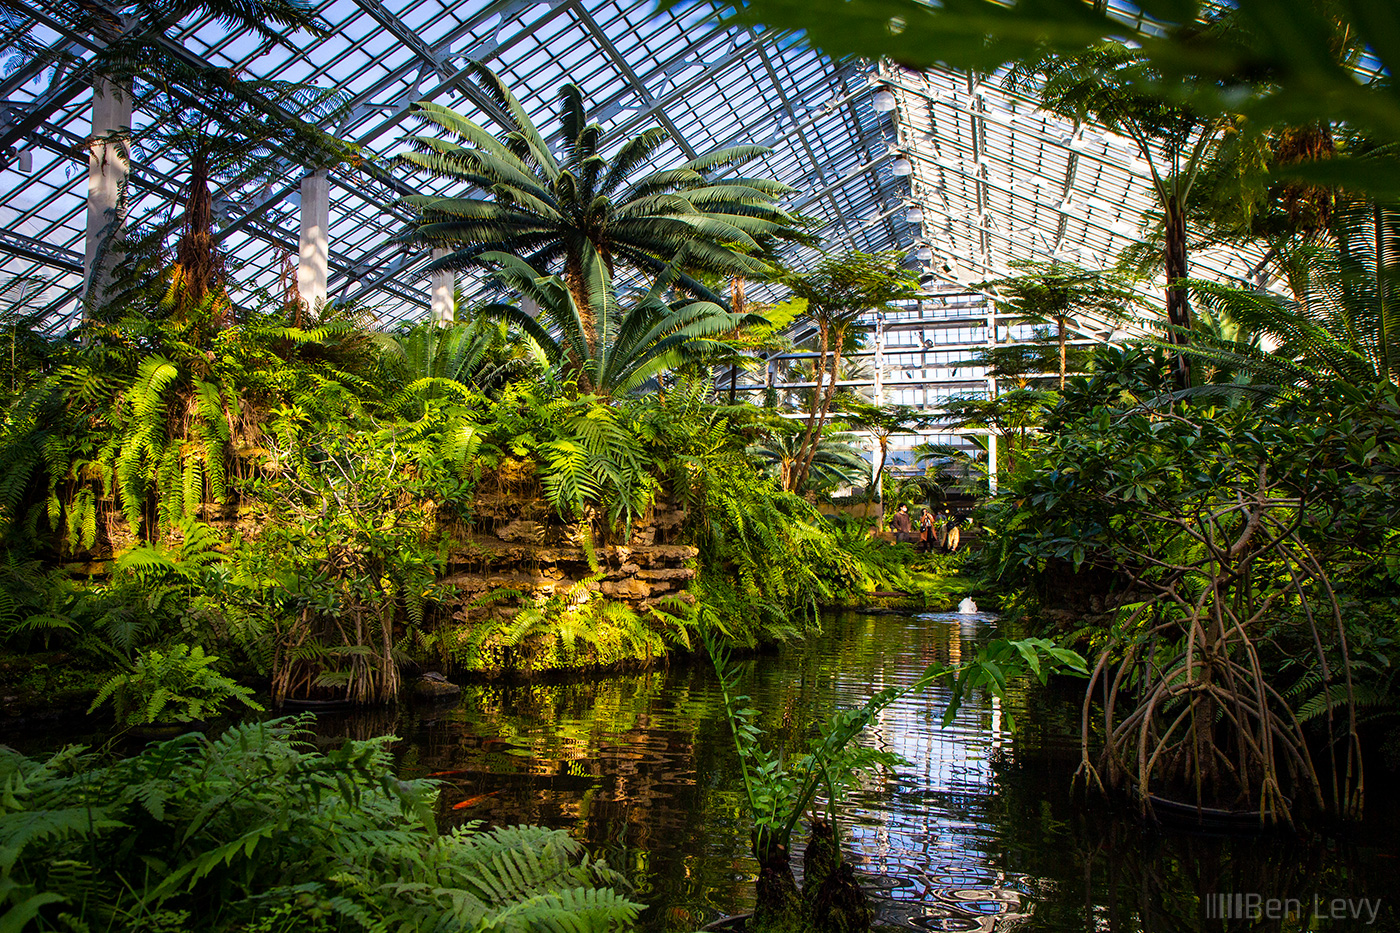 The Fern Room at Garfield Park Conservatory